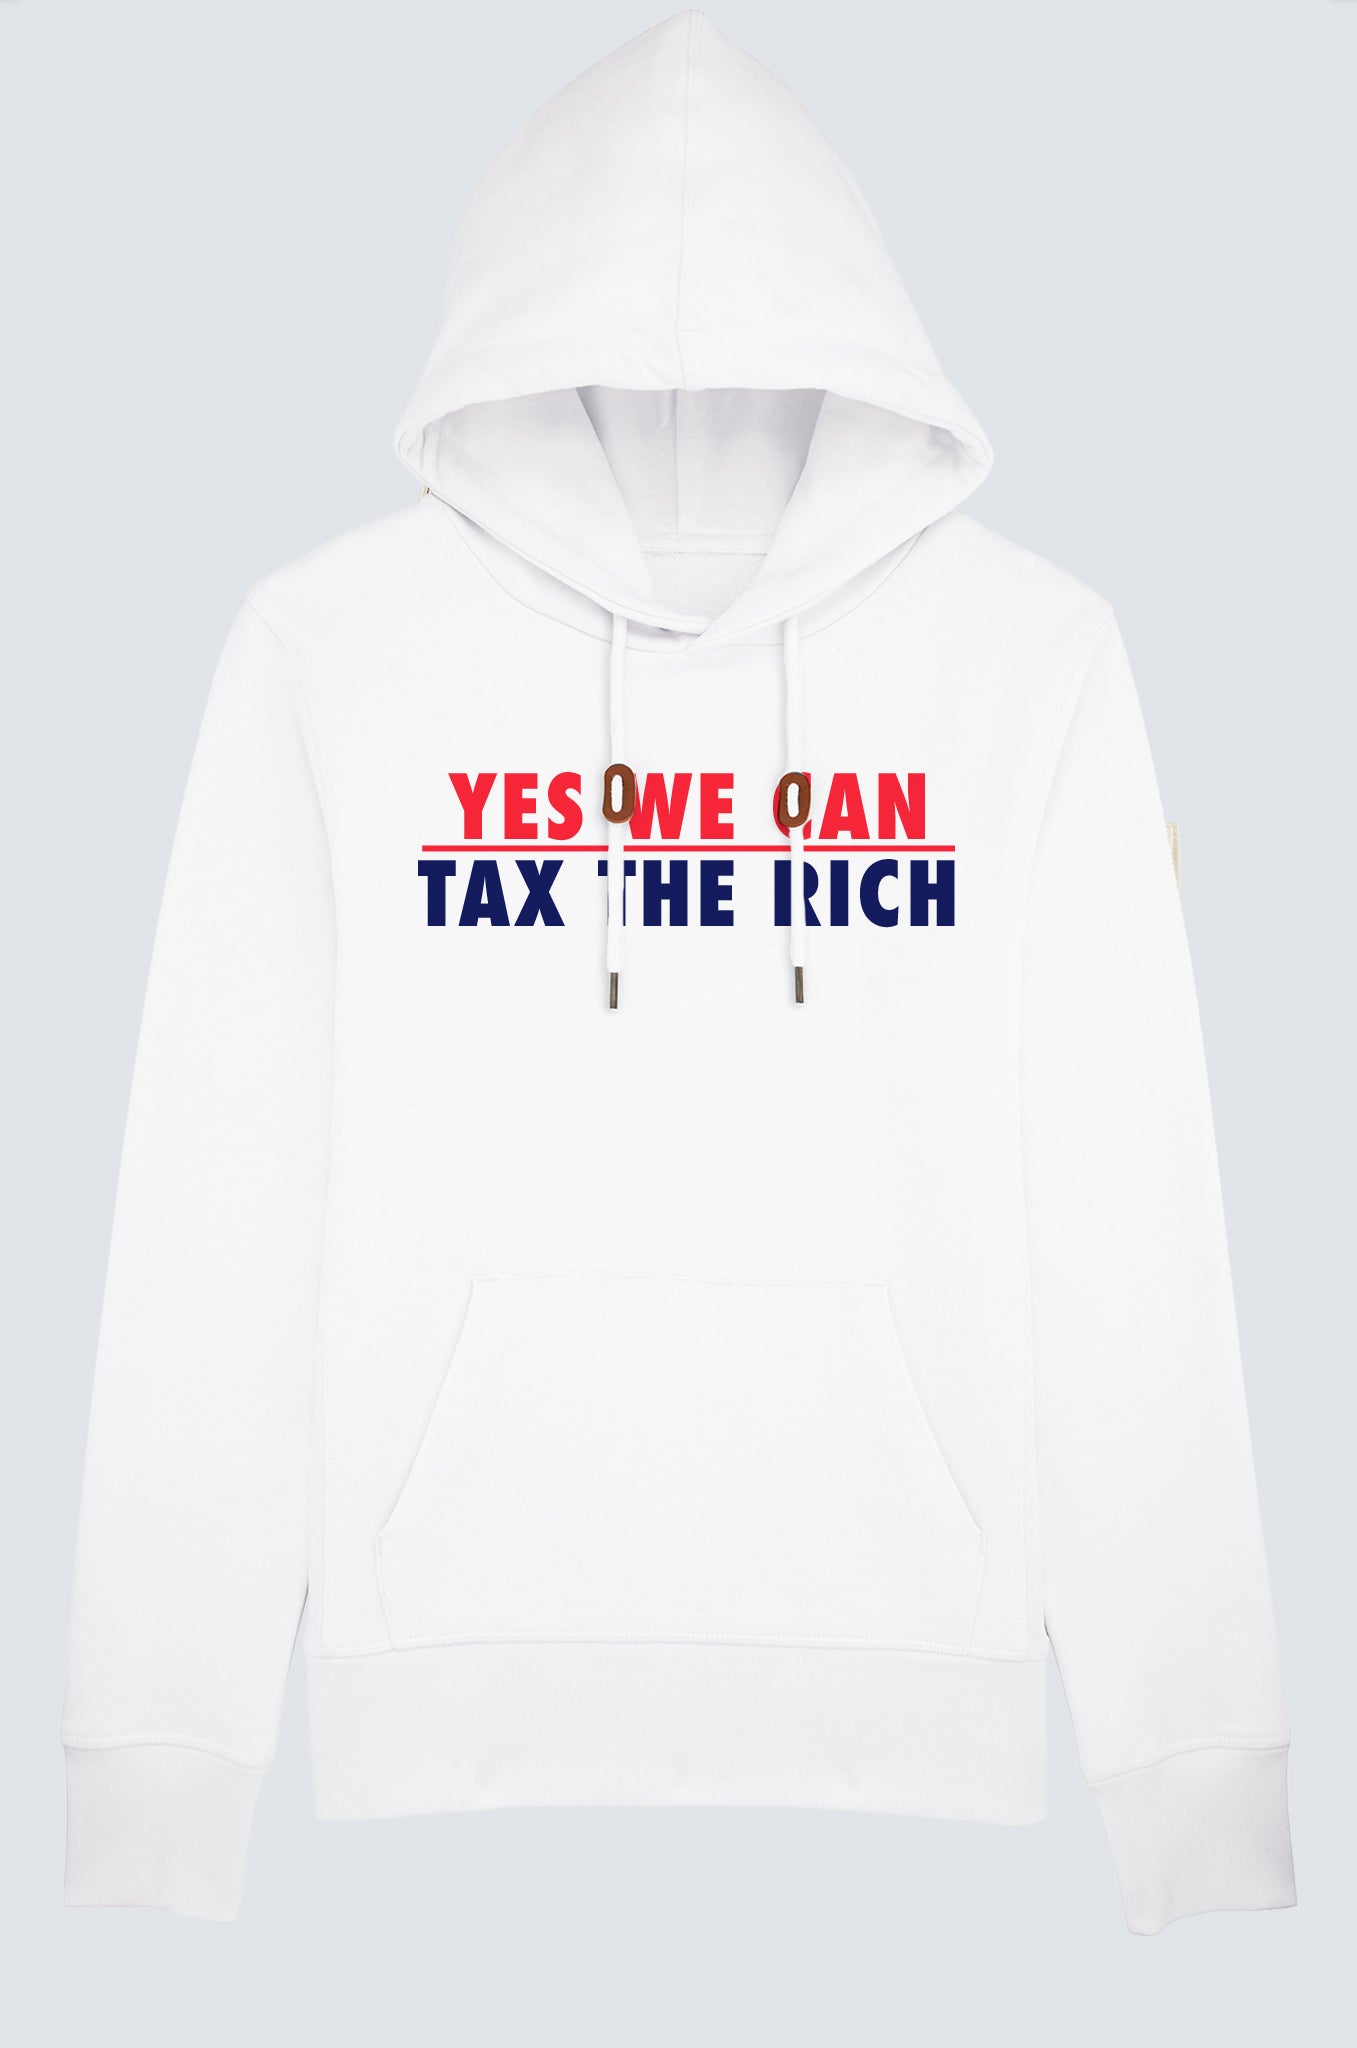 Yes we can tax the rich